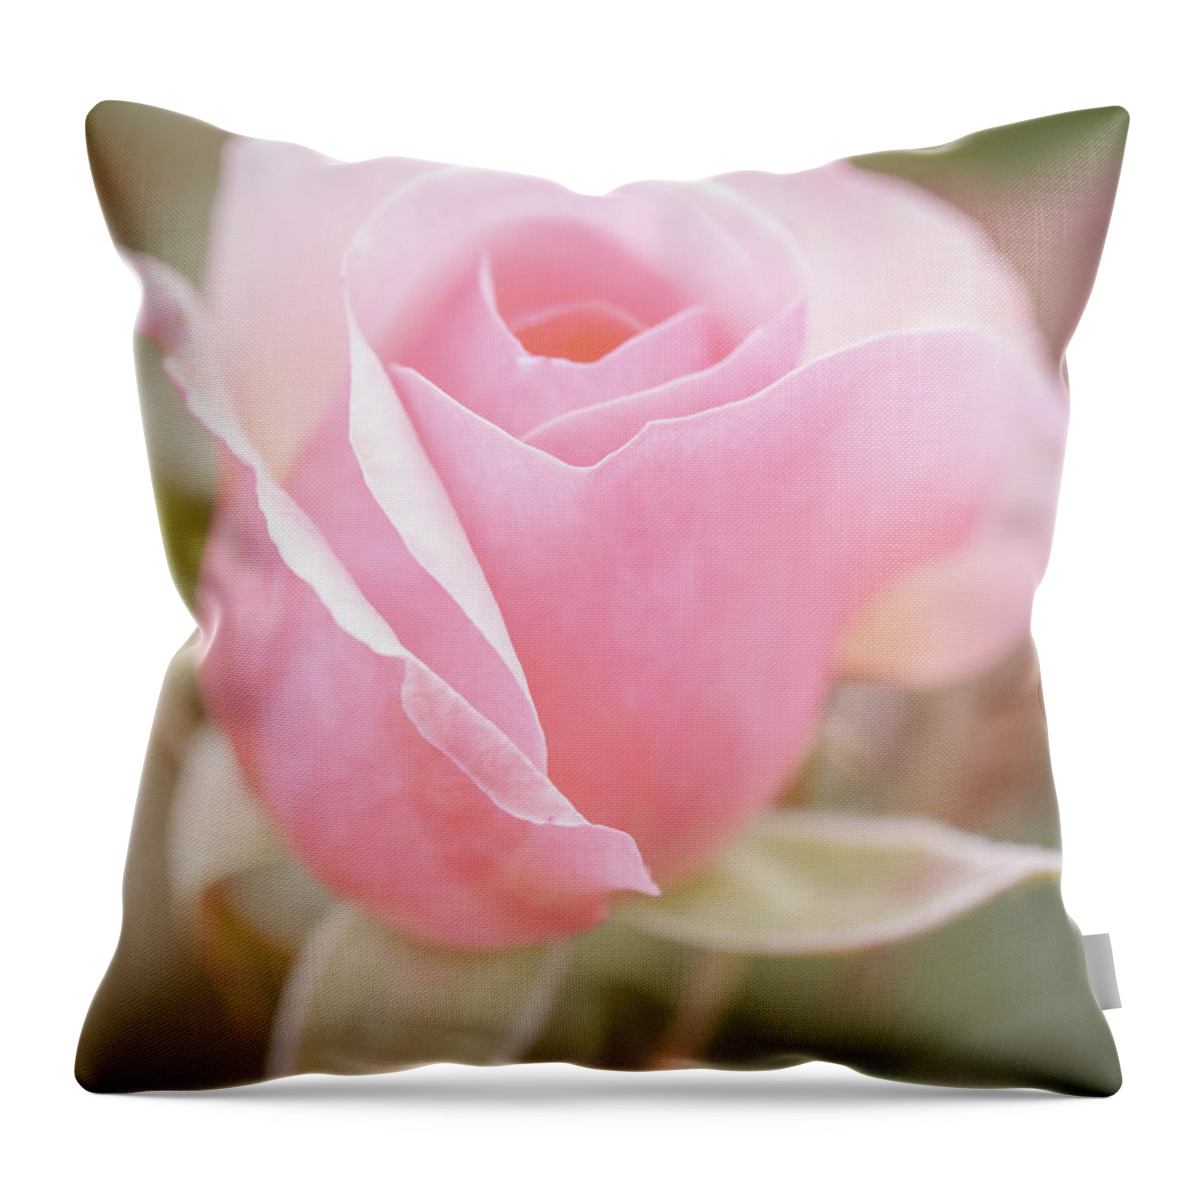 Face Throw Pillow featuring the photograph Rosebud 4 by Ryan Weddle